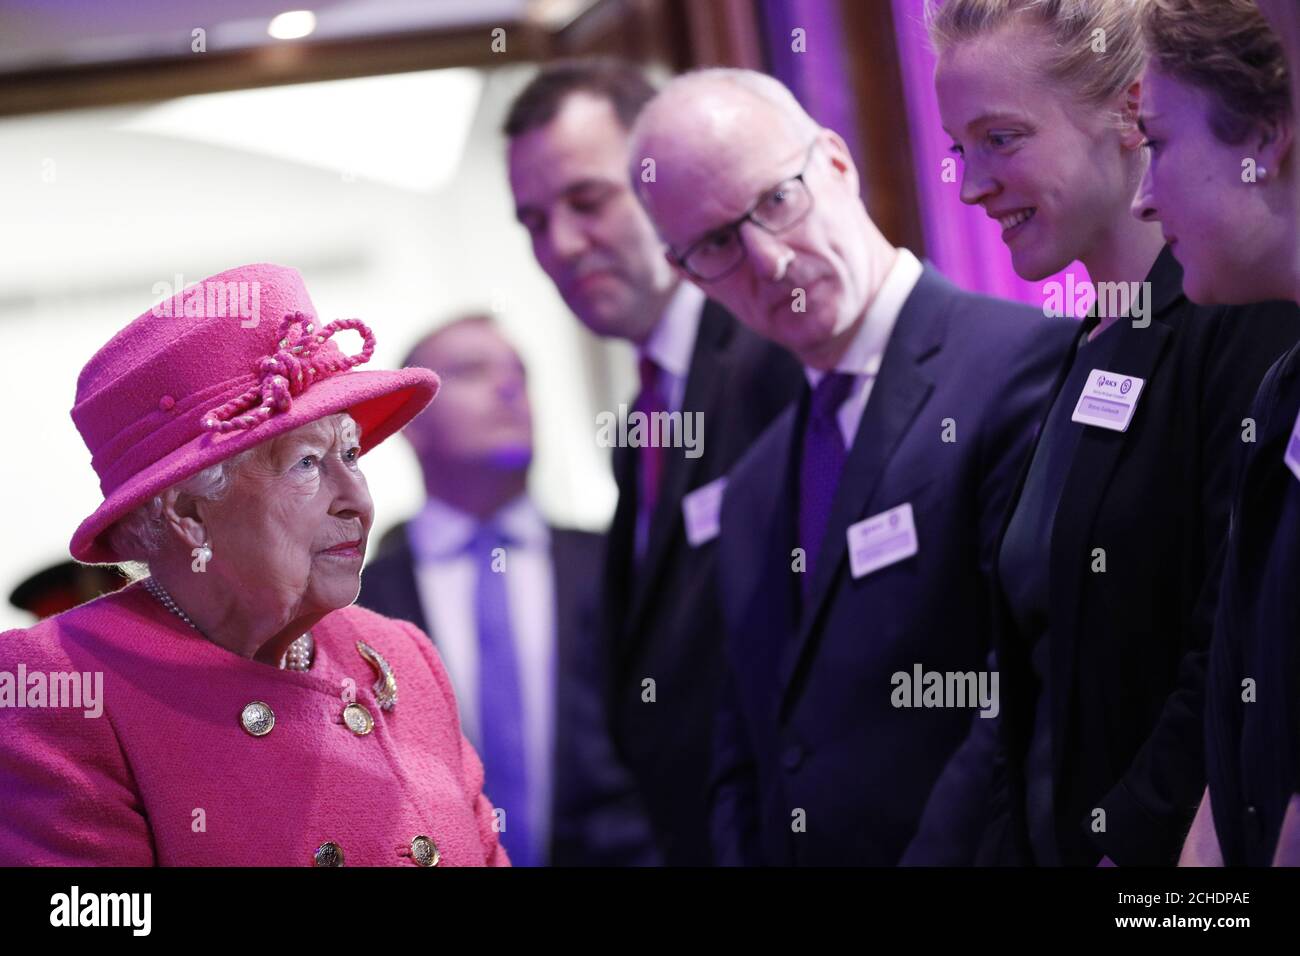 Queen Elizabeth II greets staff during a visit to the Royal Institution of Chartered Surveyors (RICS) in London, to mark its 150th anniversary. Stock Photo